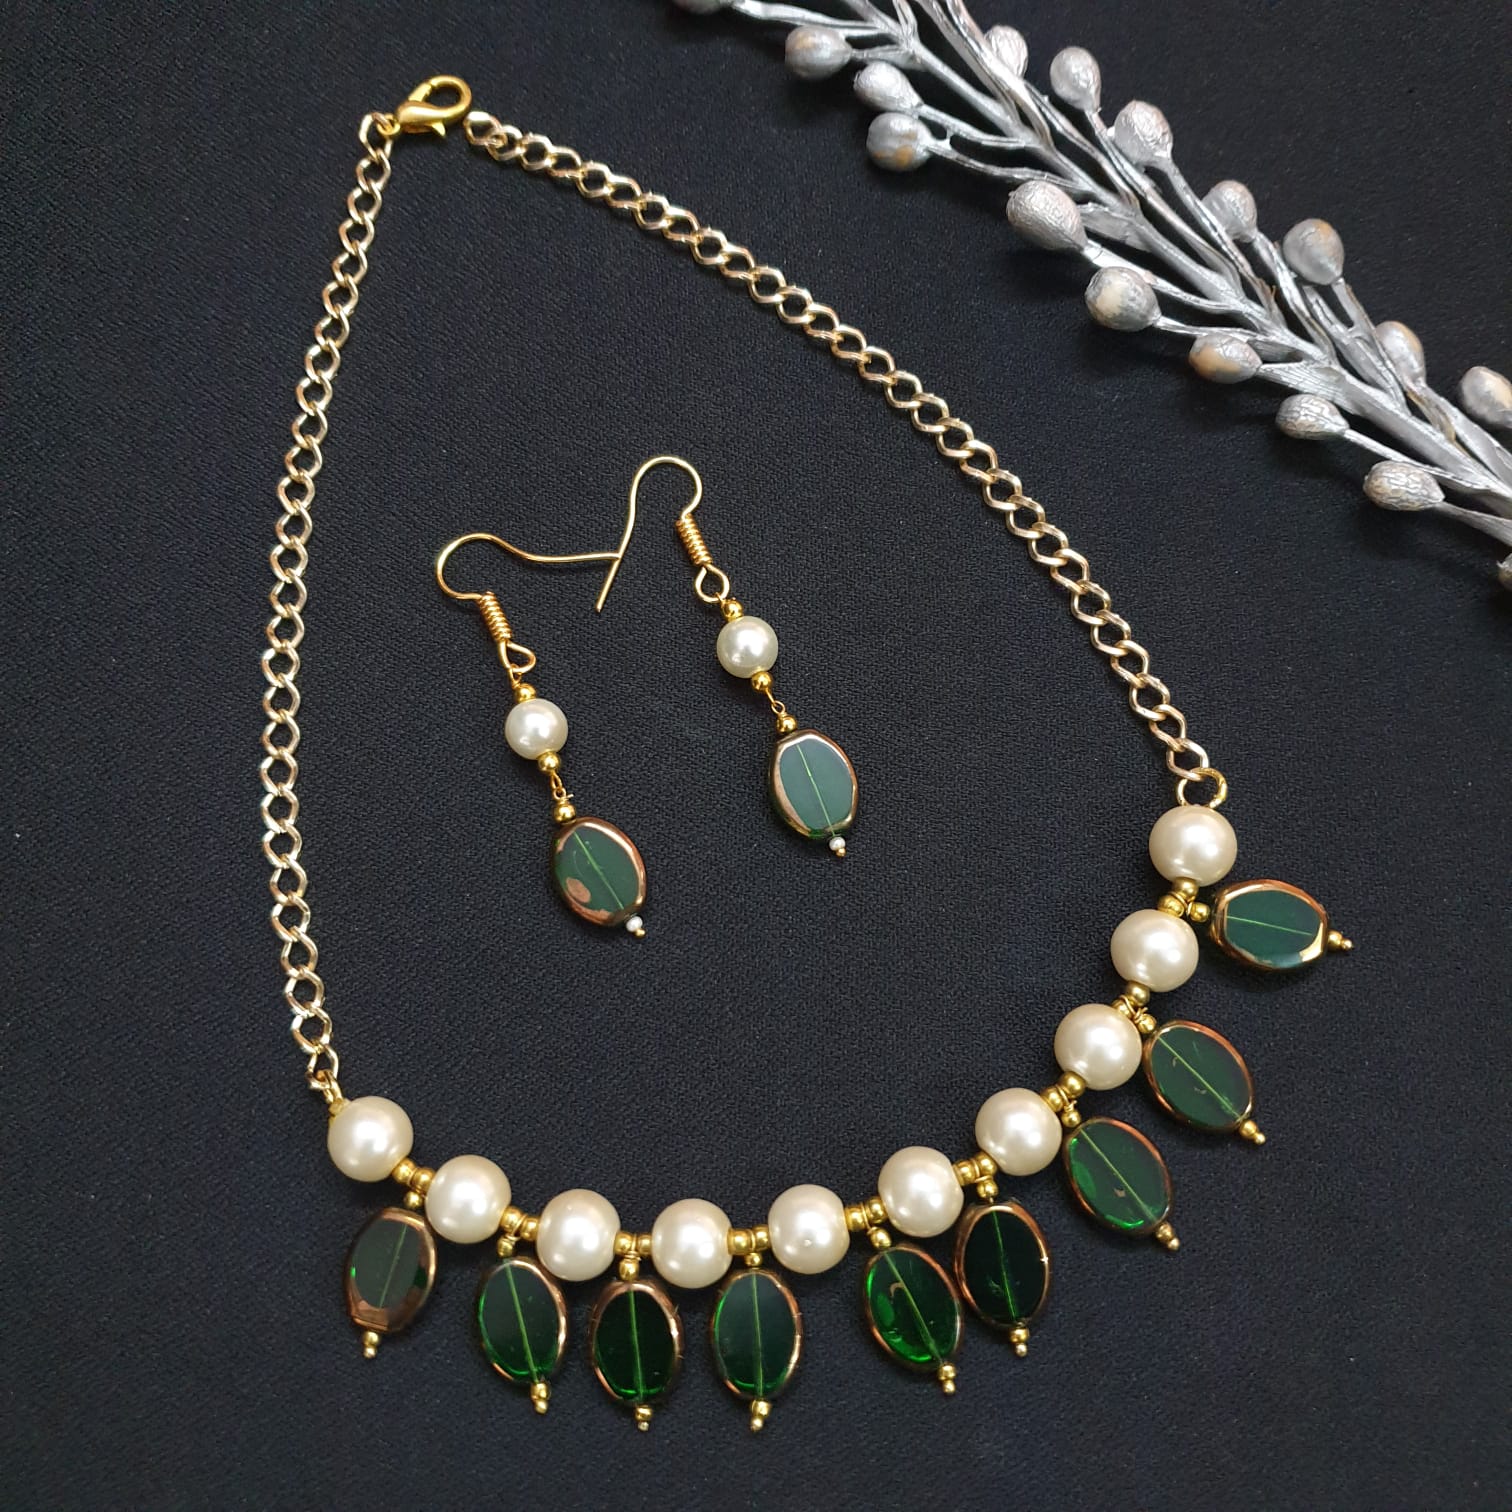 Pearl and Green Bead Necklace With Earrings